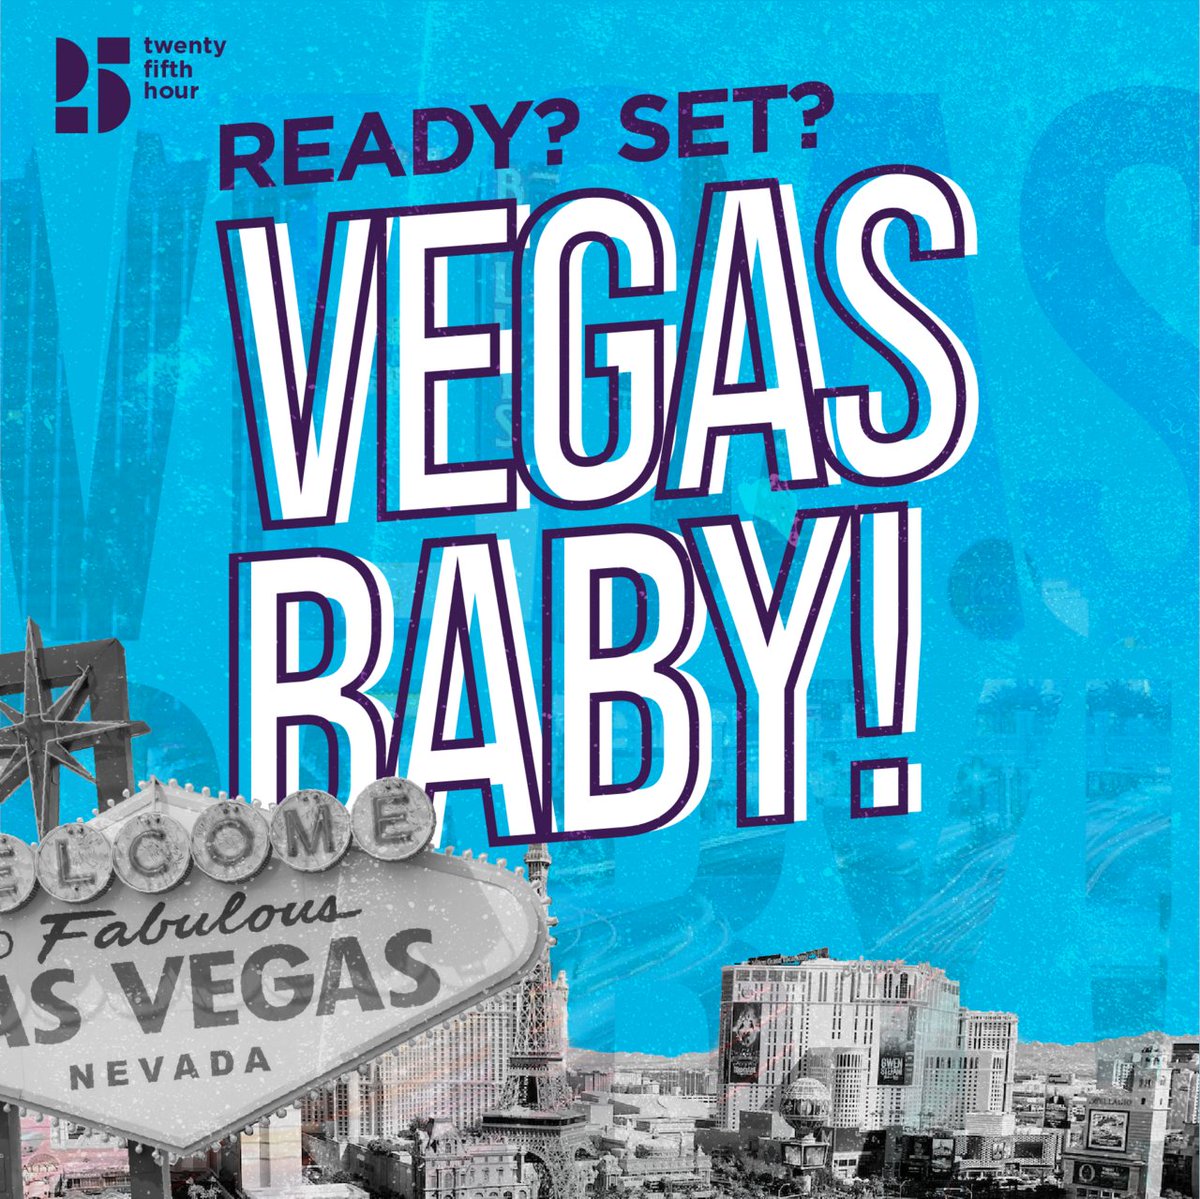 Ready. Set. VEGAS BABY! 😜 Next week, the 25th Hour squad is off to the city that never sleeps for our first-ever work retreat! We're ready to mix business with a splash of Vegas magic! #BestTeamEver #WorkHardPlayHard #VegasBound